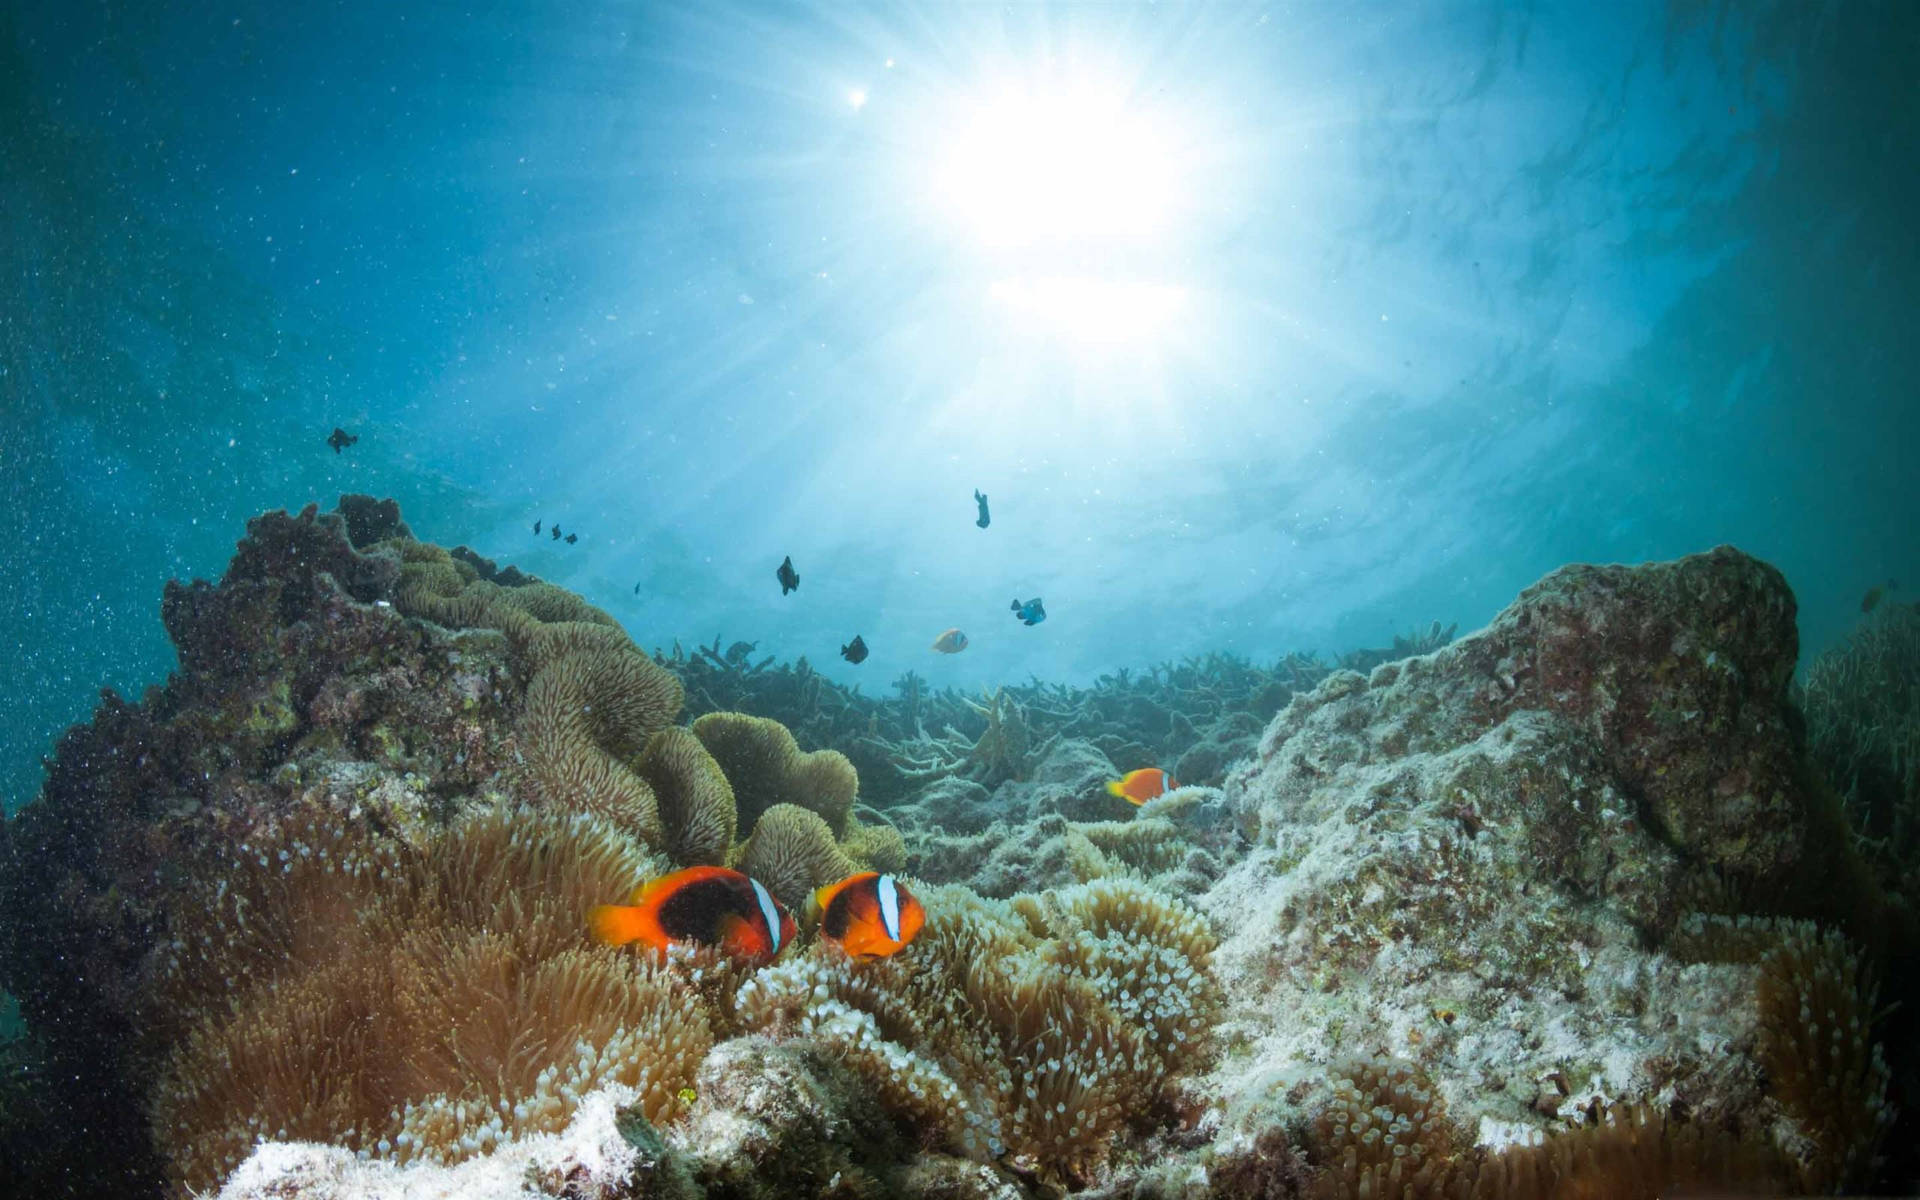 Vibrant Ecosystem - Anemonefish in the Coral Reef Wallpaper